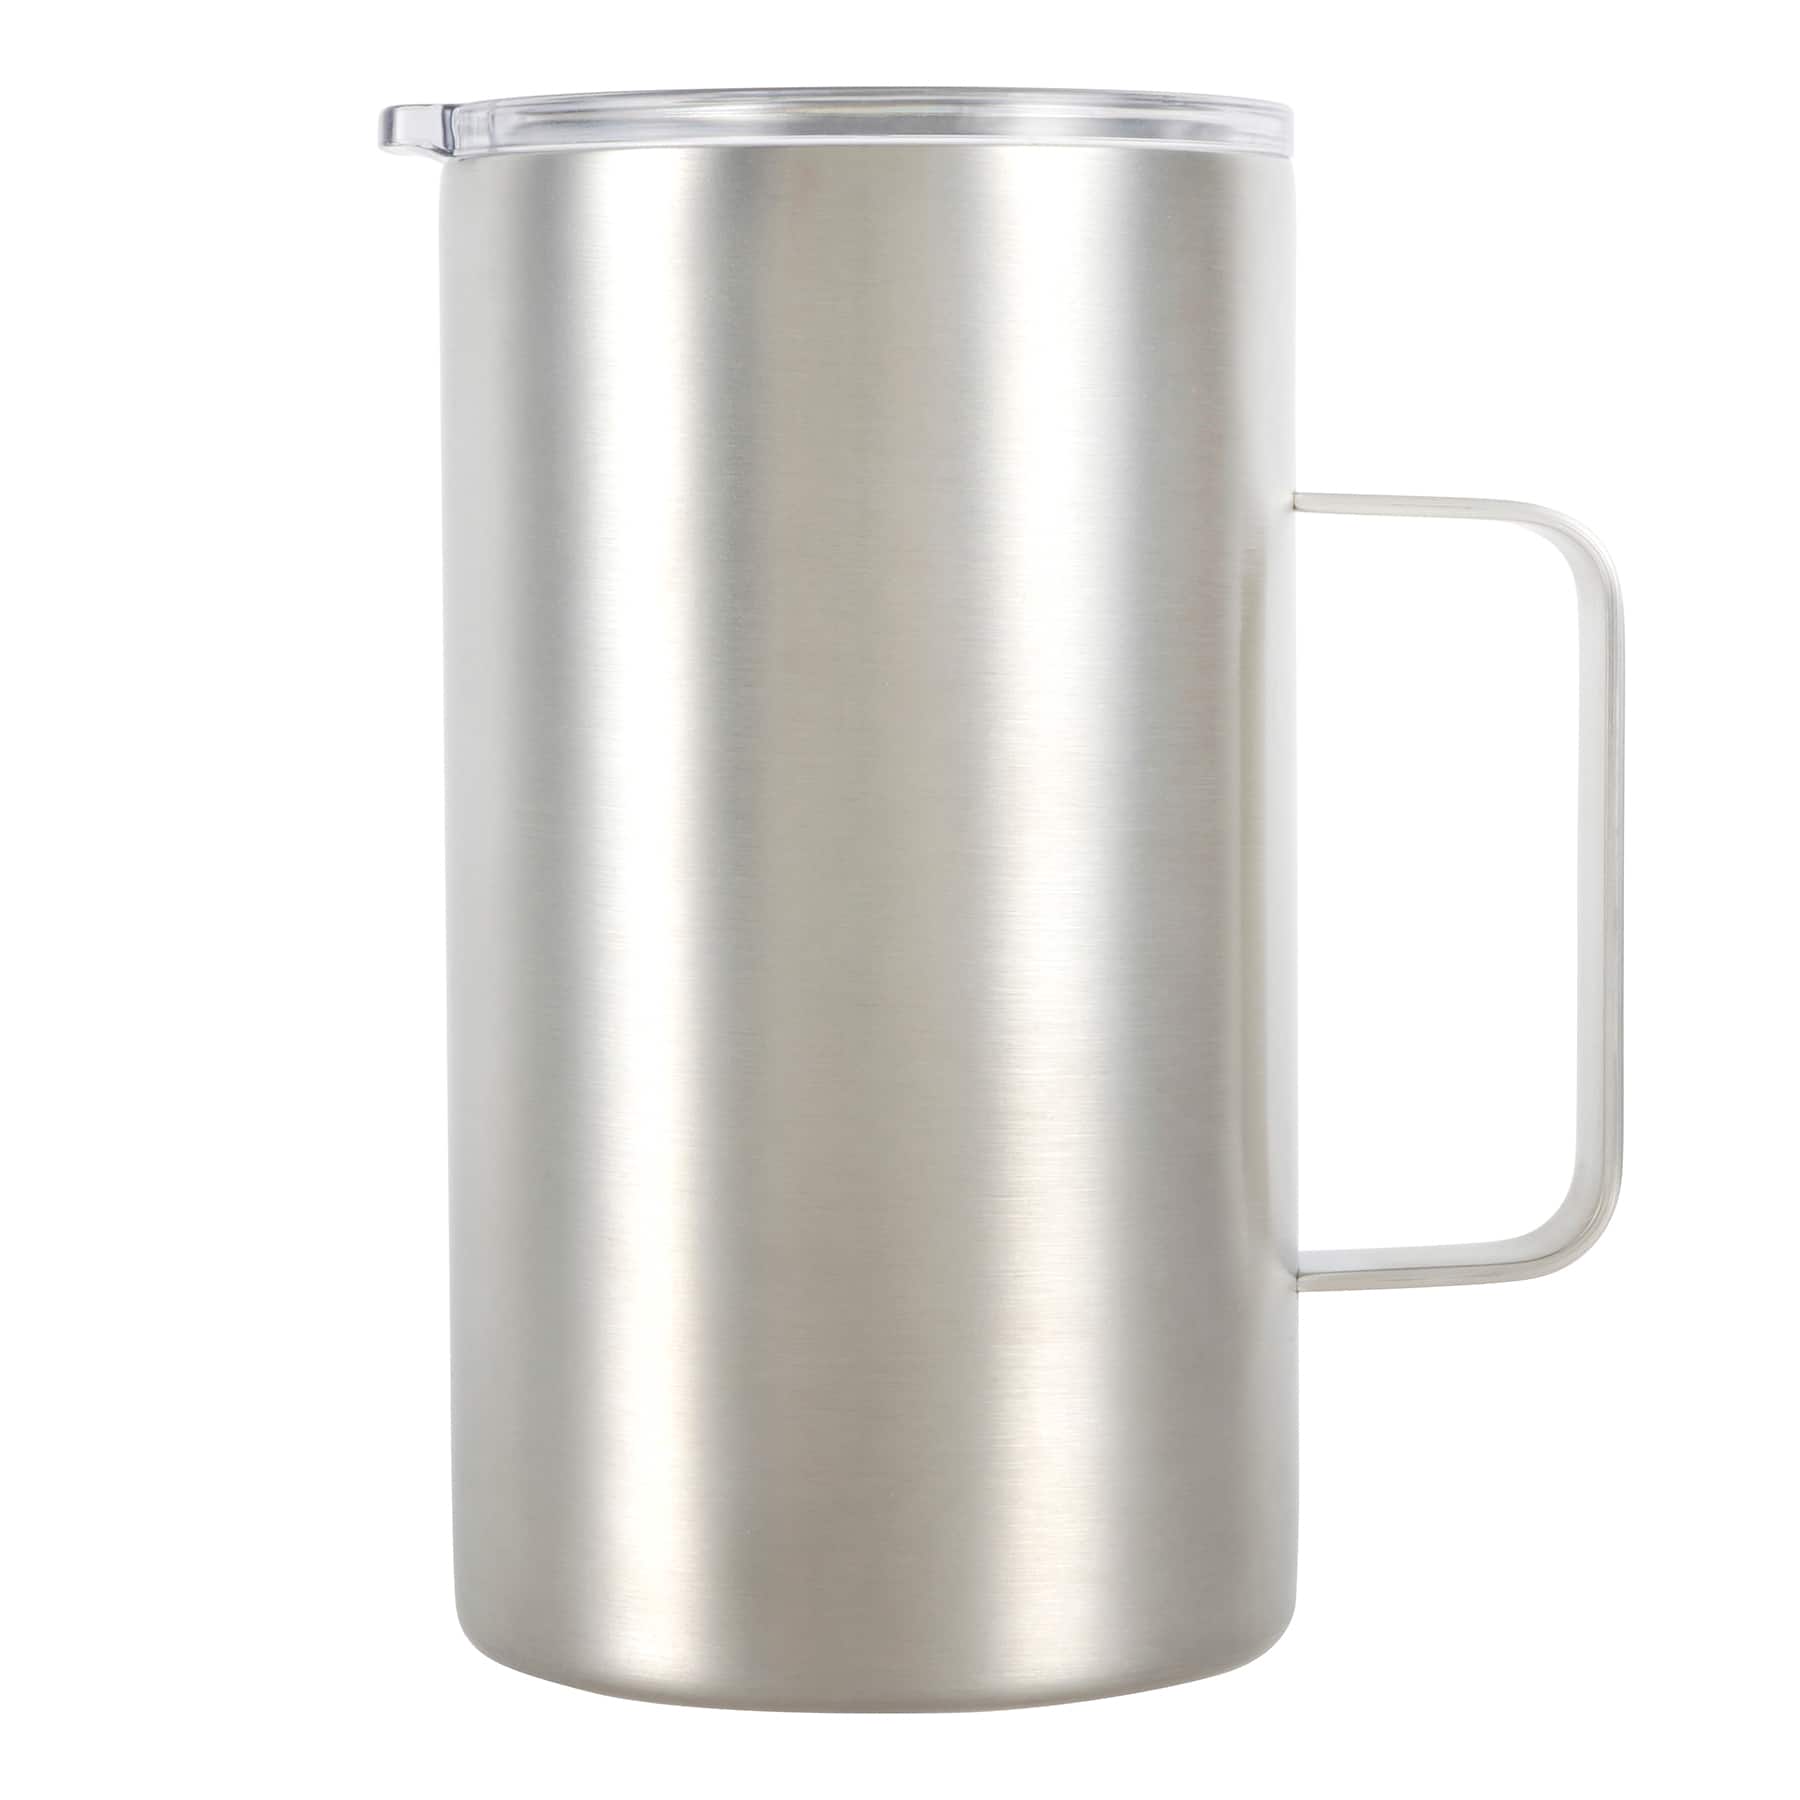 Celebrate It 15 Ounce White Stainless Steel Coffee Mug - Each